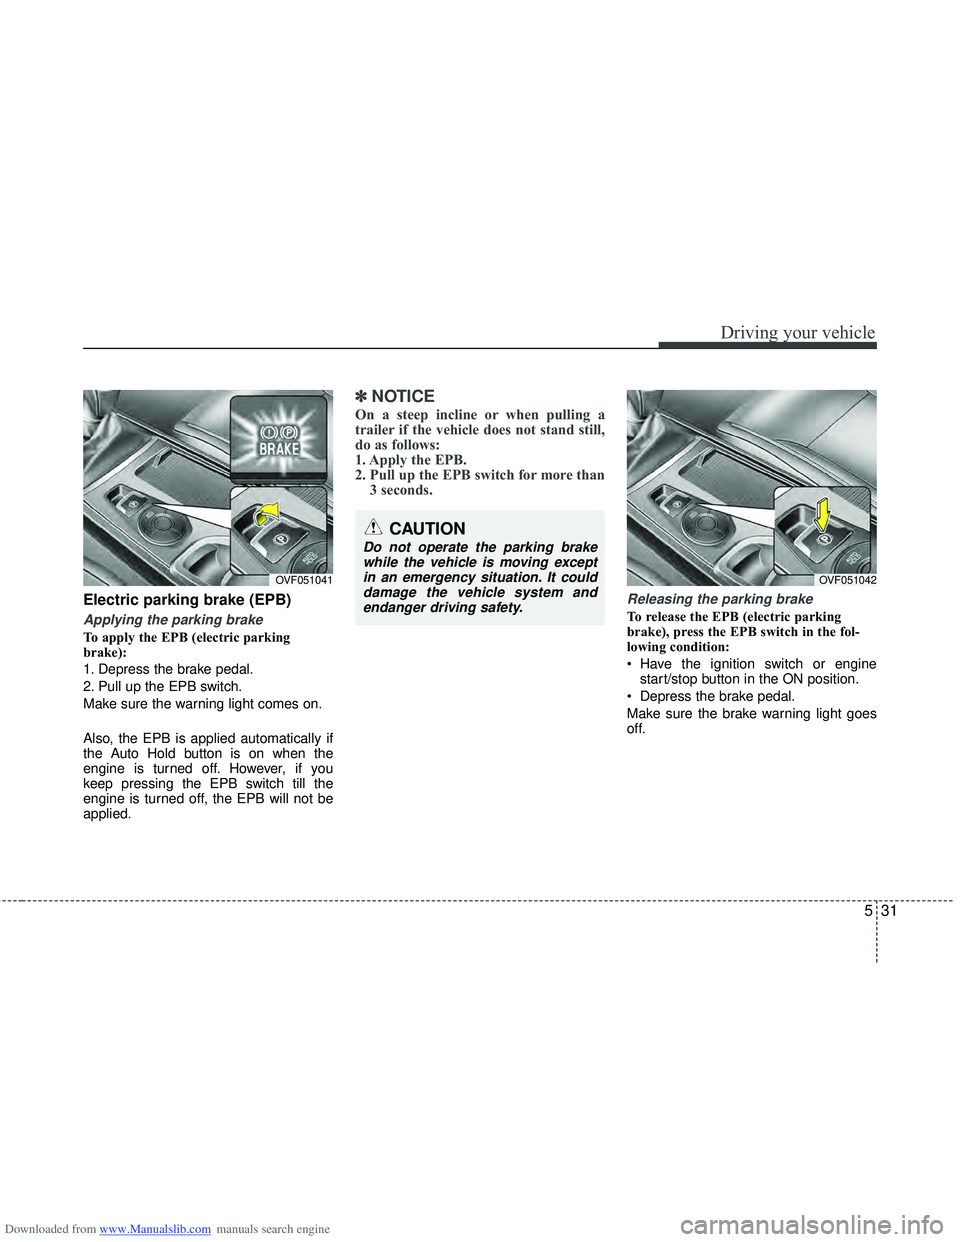 HYUNDAI I40 2011  Owners Manual Downloaded from www.Manualslib.com manuals search engine 531
Driving your vehicle
Electric parking brake (EPB)
Applying the parking brake
To apply the EPB (electric parking
brake):
1. Depress the brak